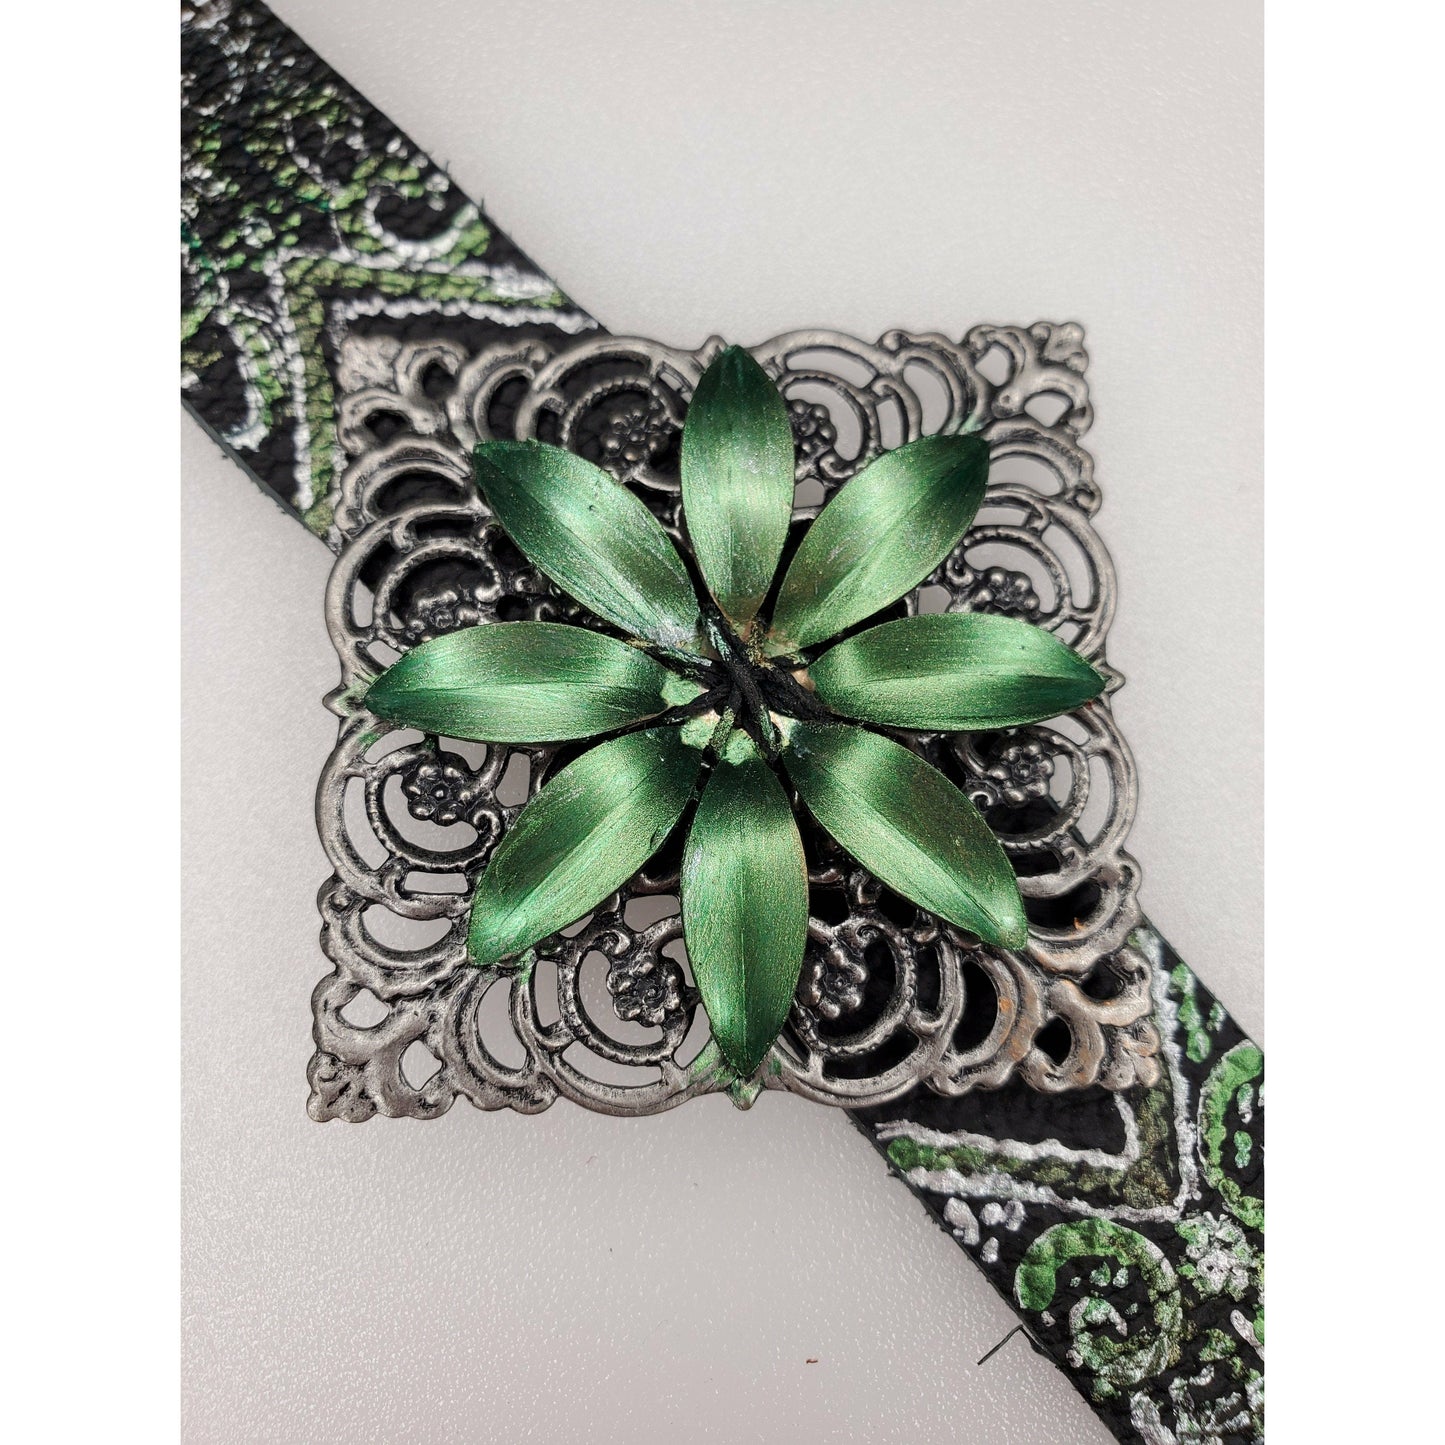 Green and Silver Black Leather Band Bracelet